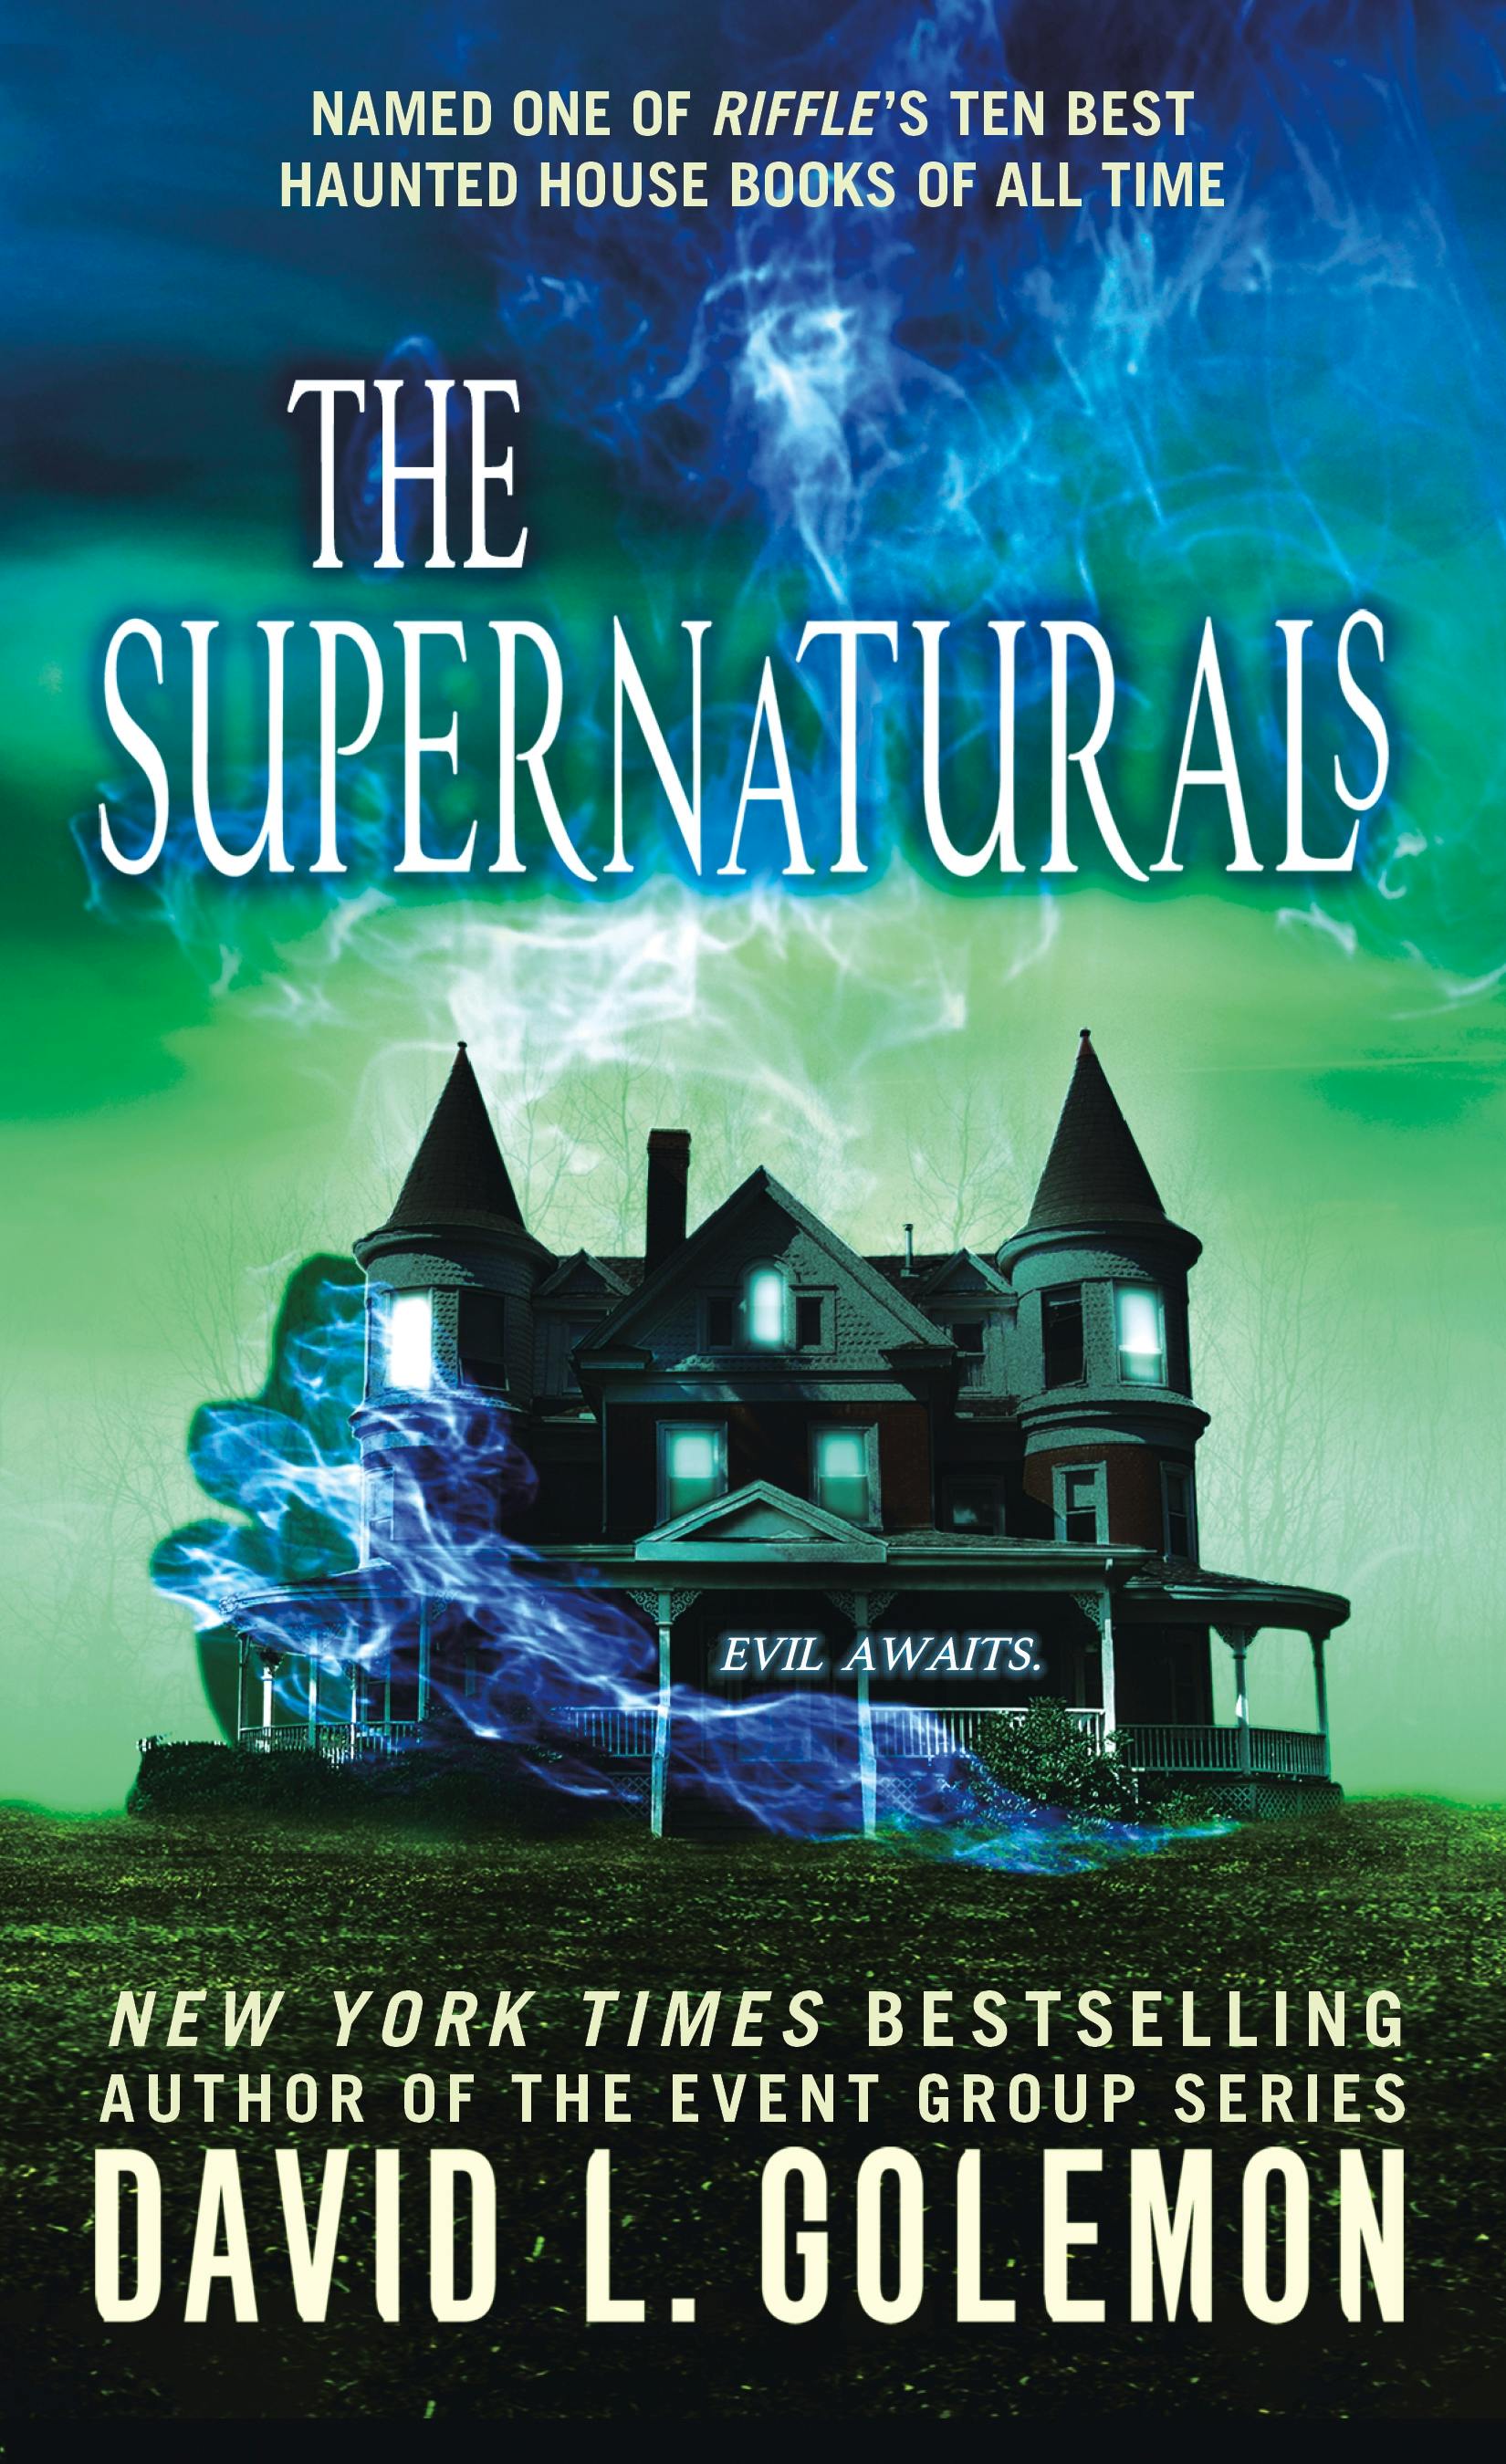 Image of The Supernaturals